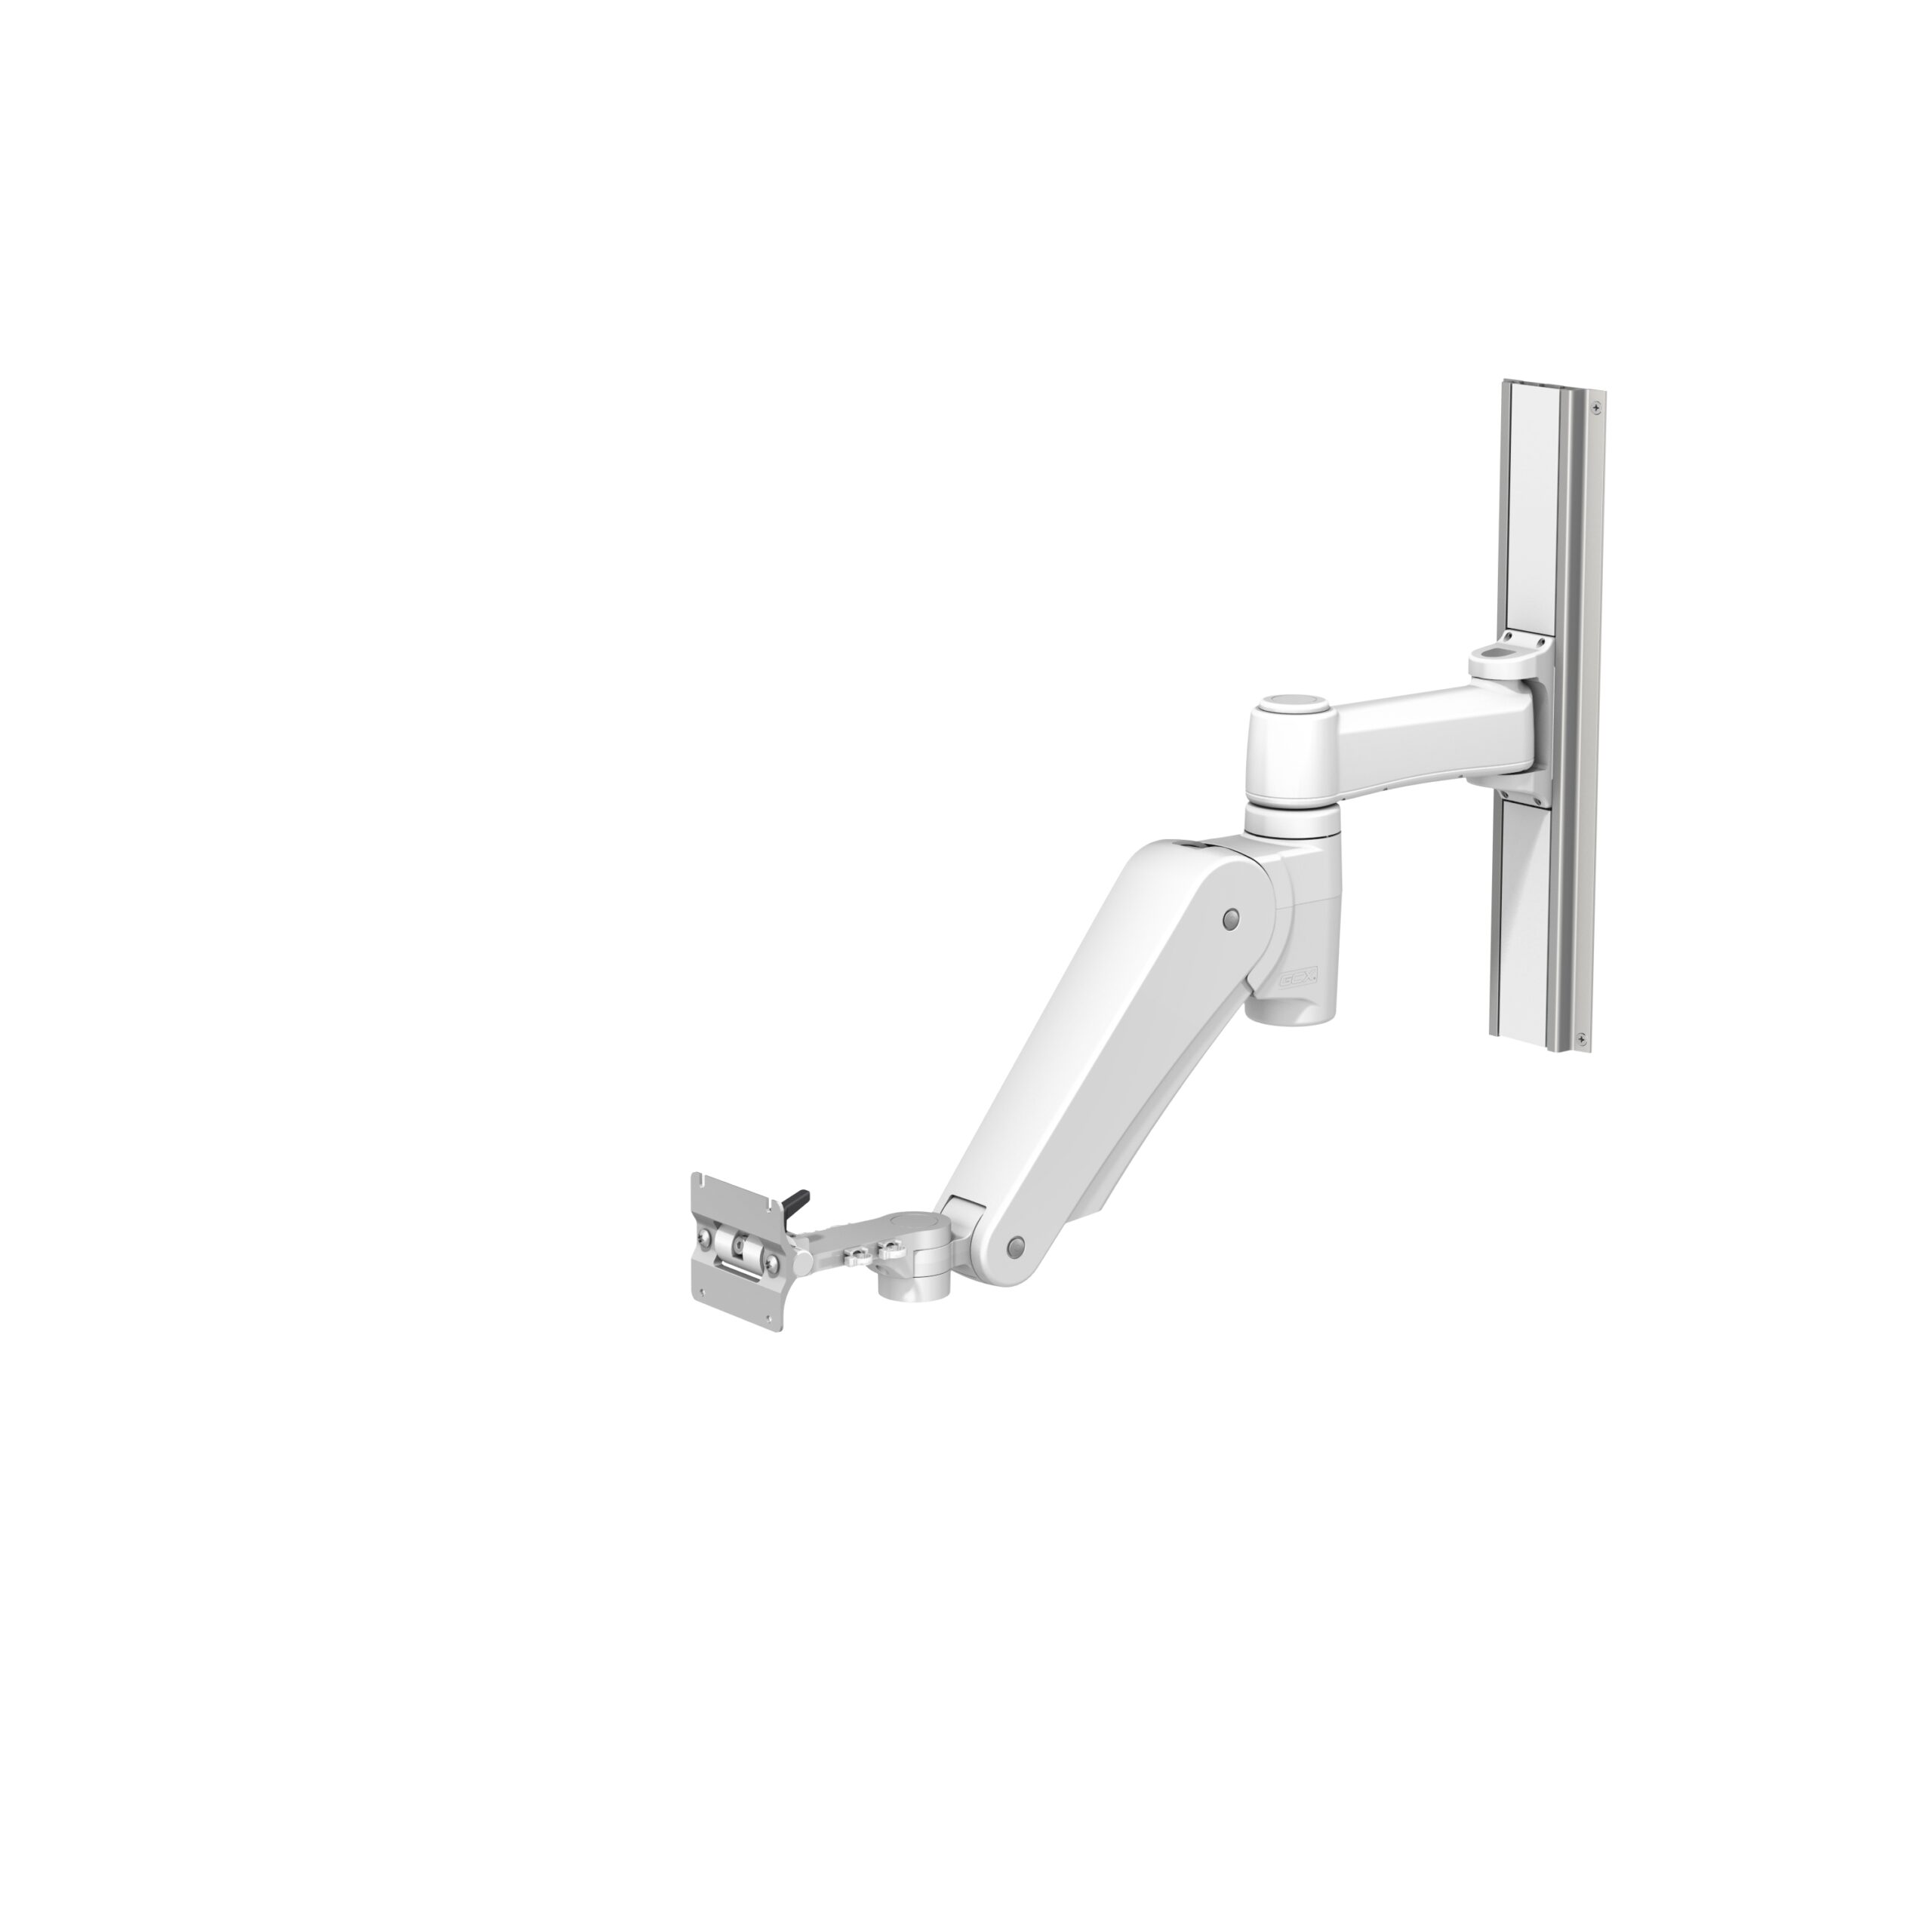 VHM-P (Non-Locking) Variable Height Arm with 8